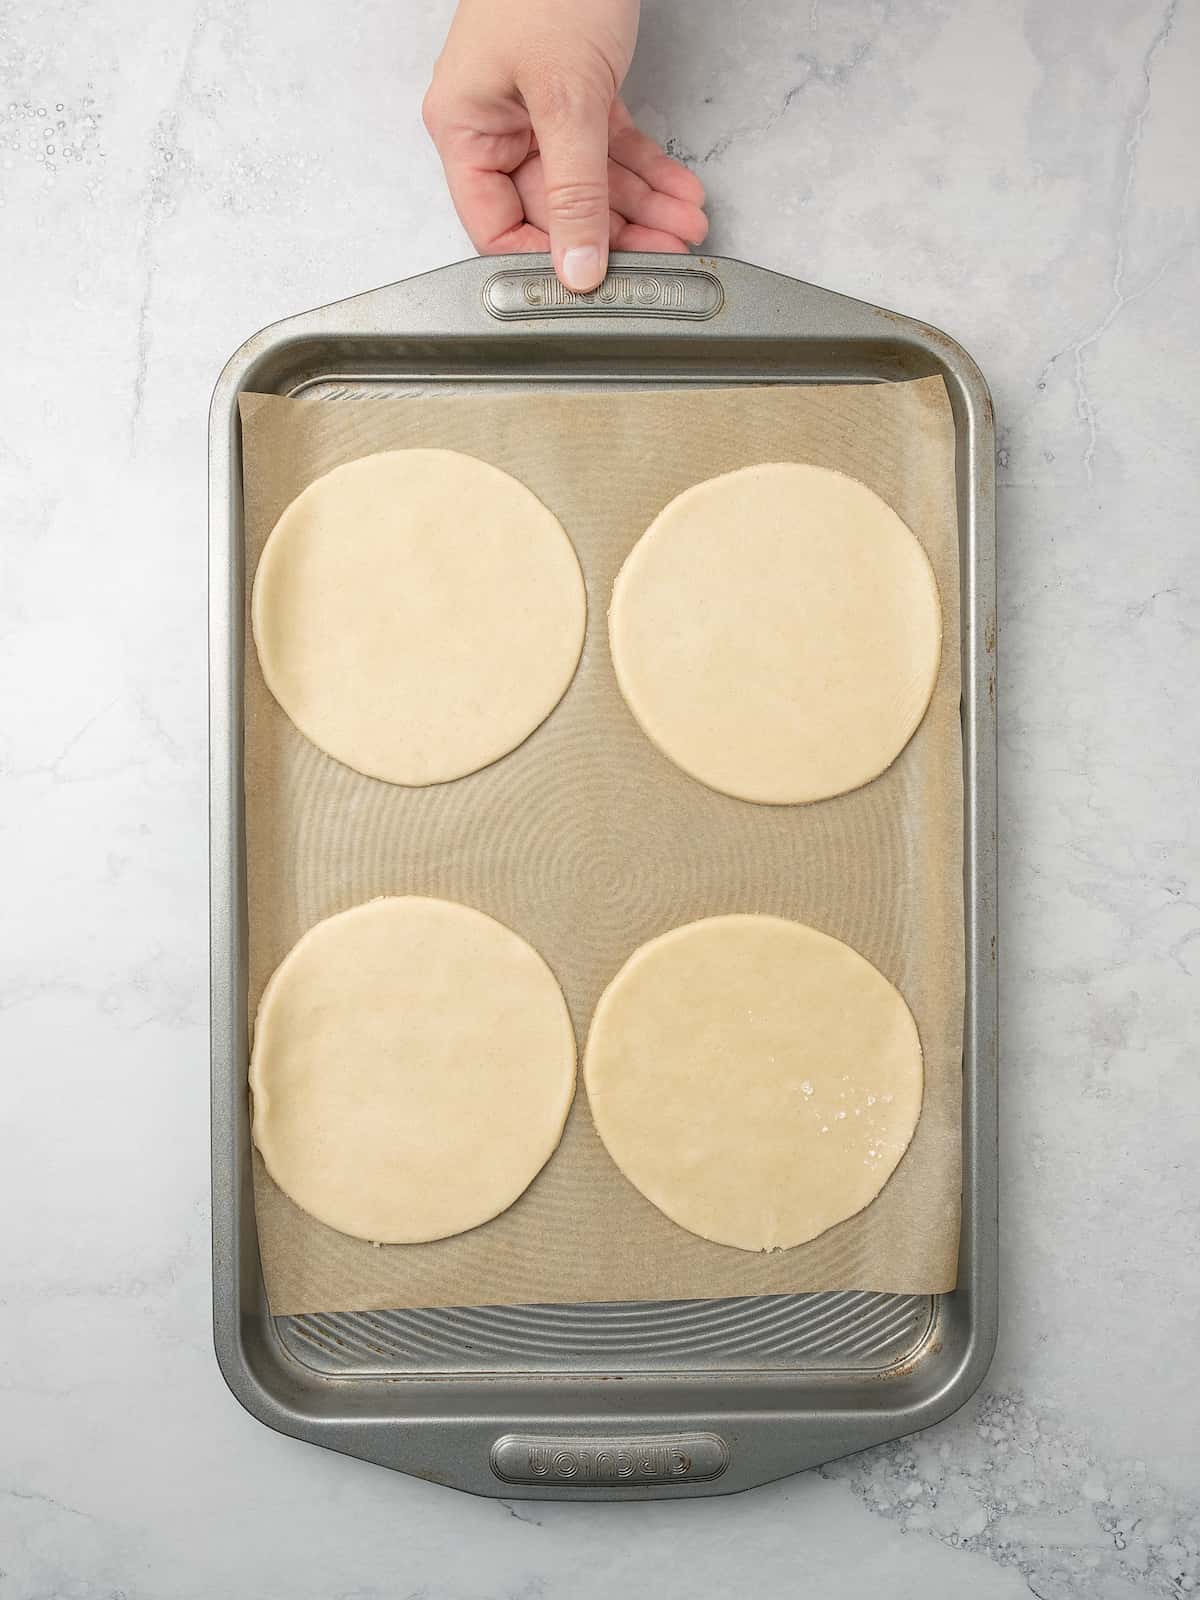 A hand holding a parchment lined baking sheet with four rounds of pastry dough.